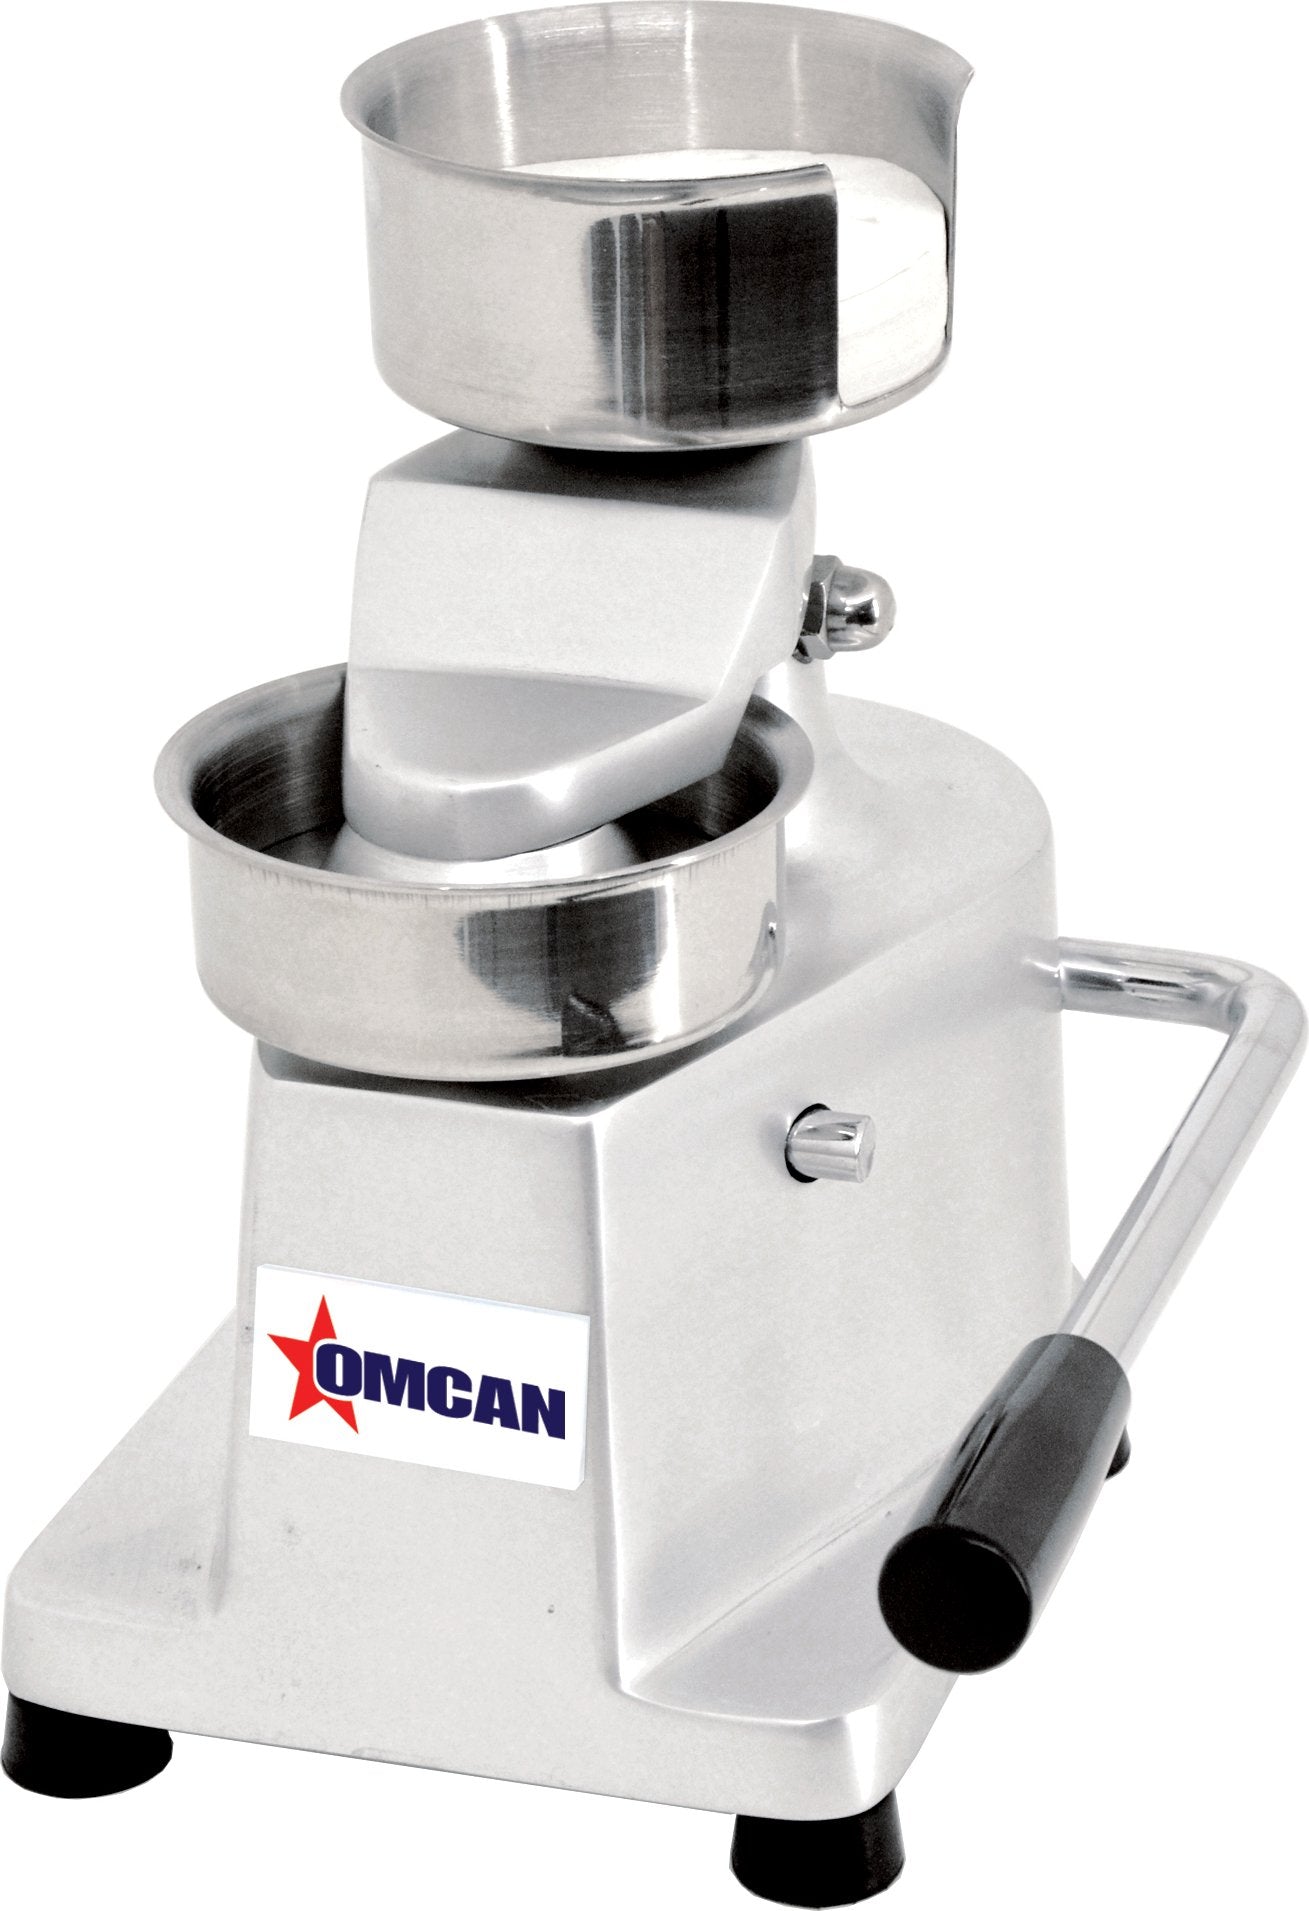 Omcan - Top-Down 5.2" Patty Maker with Rear-Mounted Paper Holder - 21573